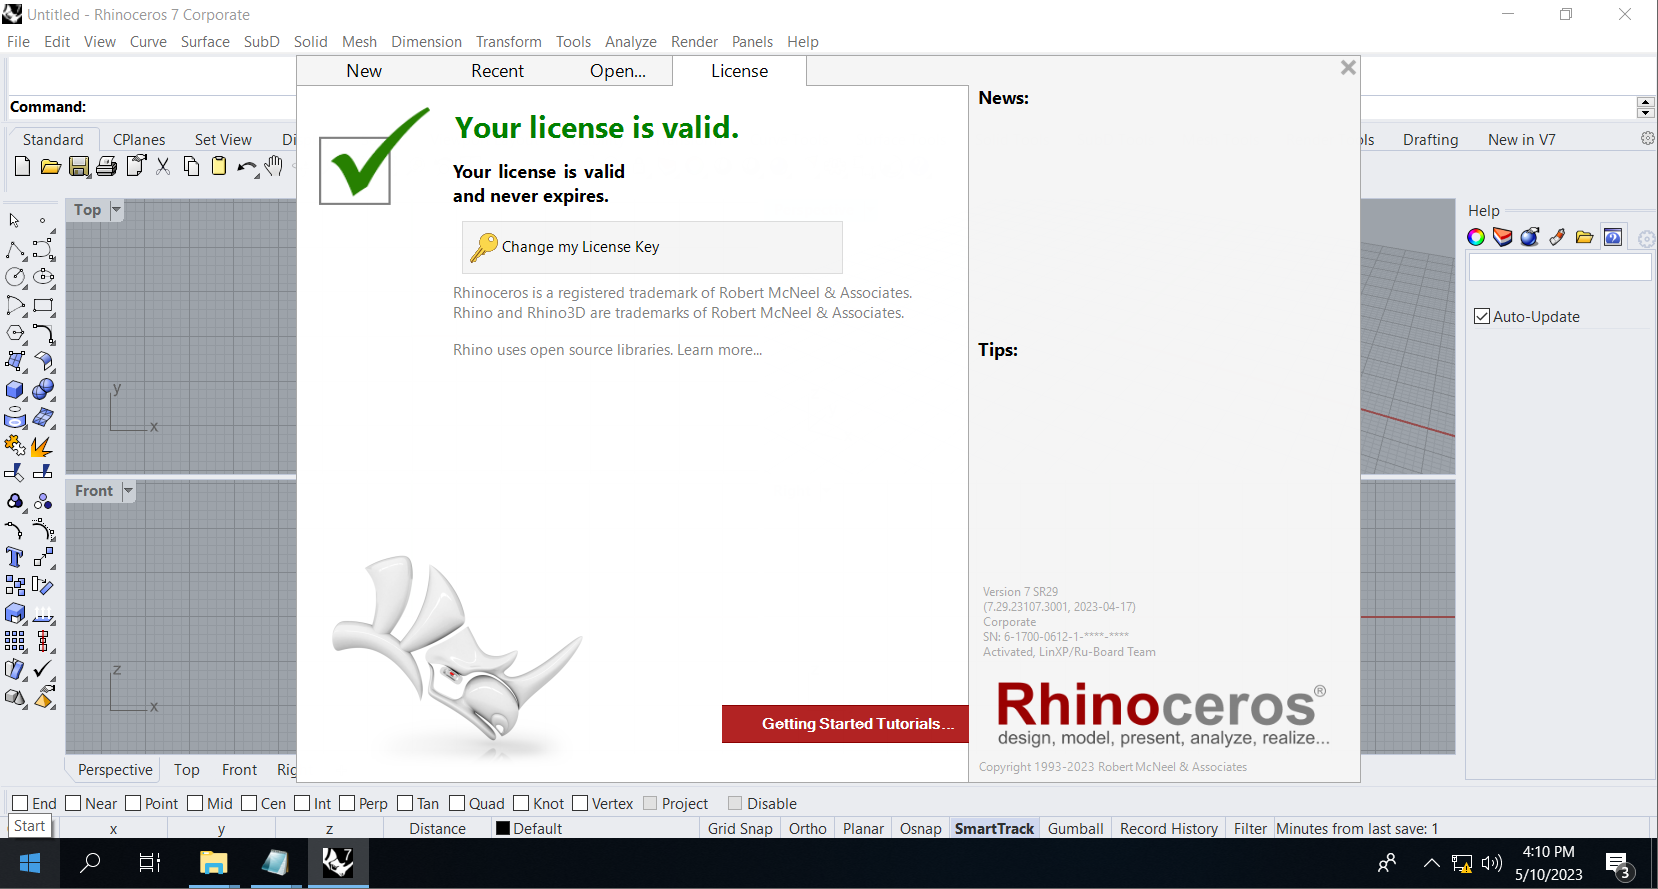 Working with Rhinoceros 7.29.23107 full license